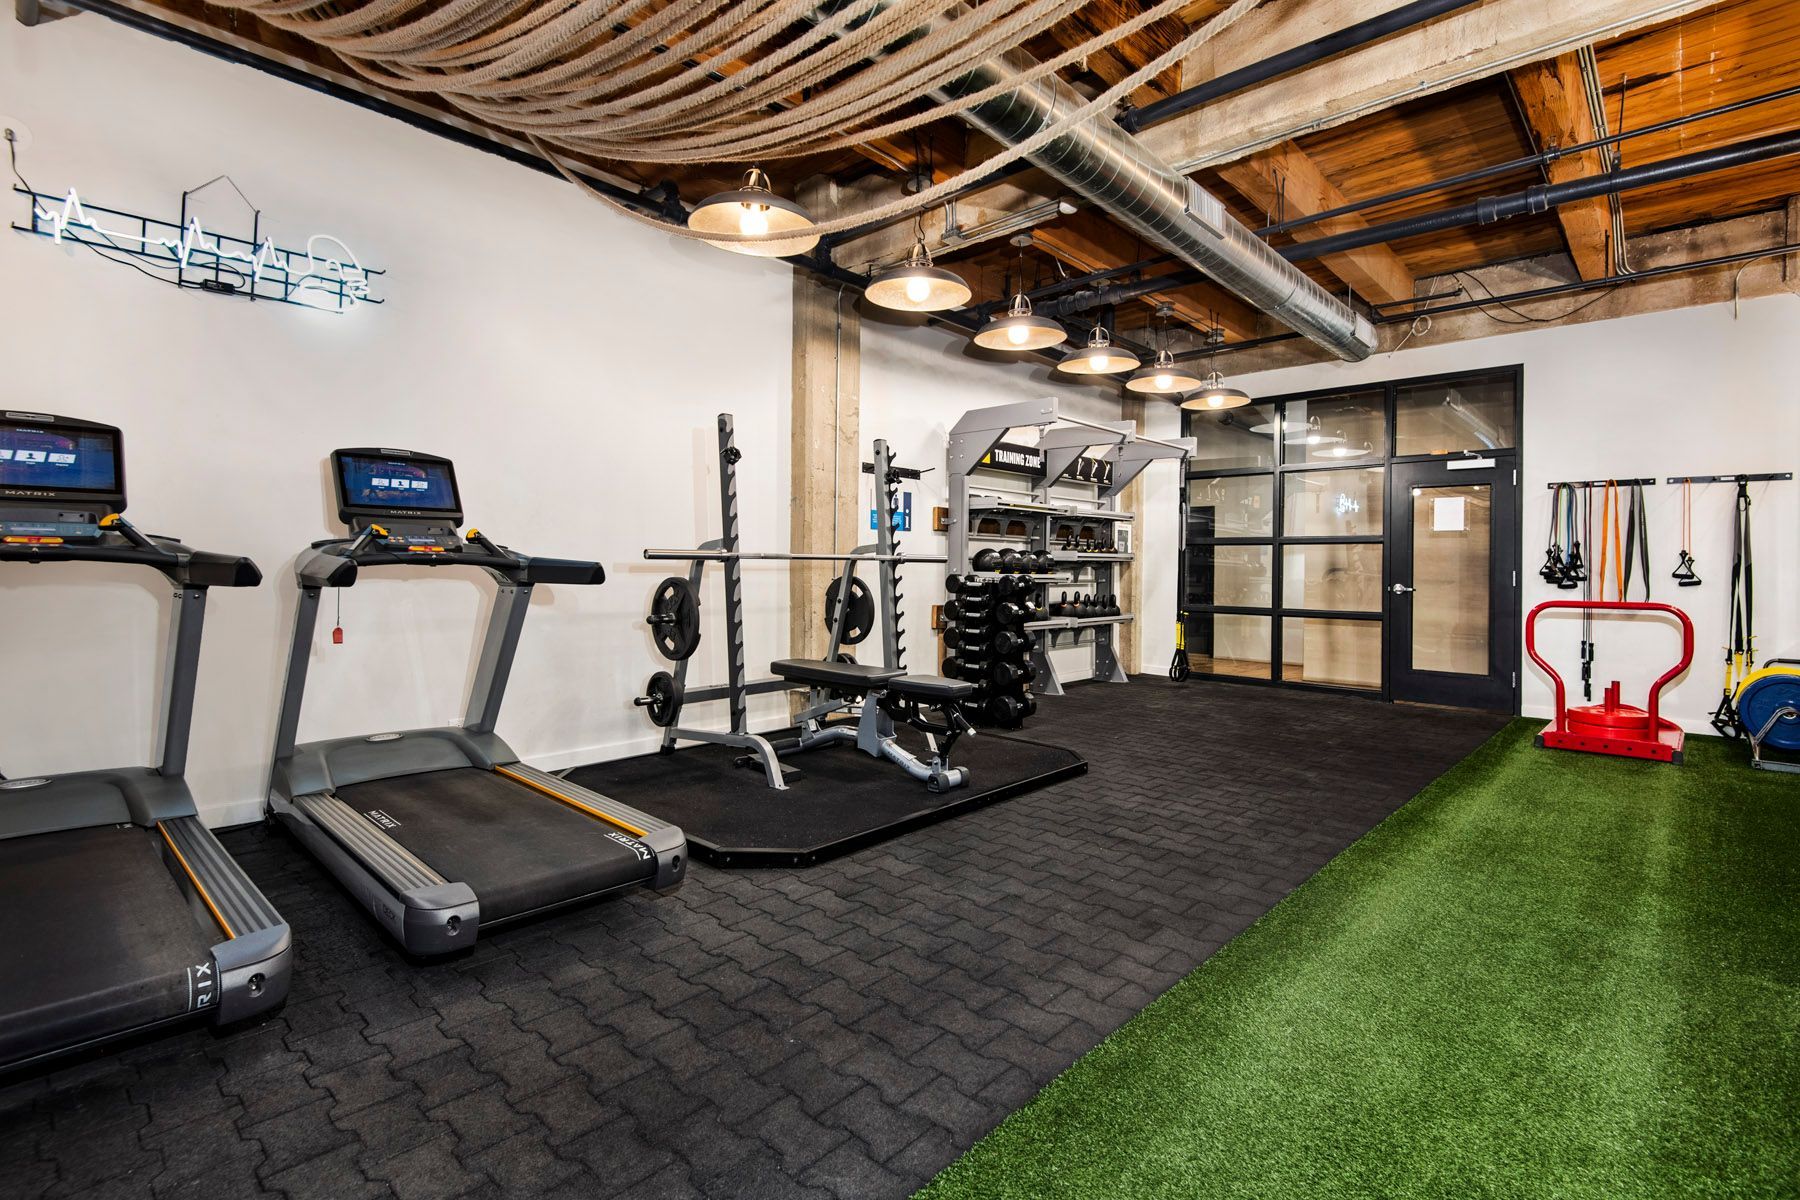 A gym with treadmills , weights , and a green carpet at The Lofts at Gin Alley.